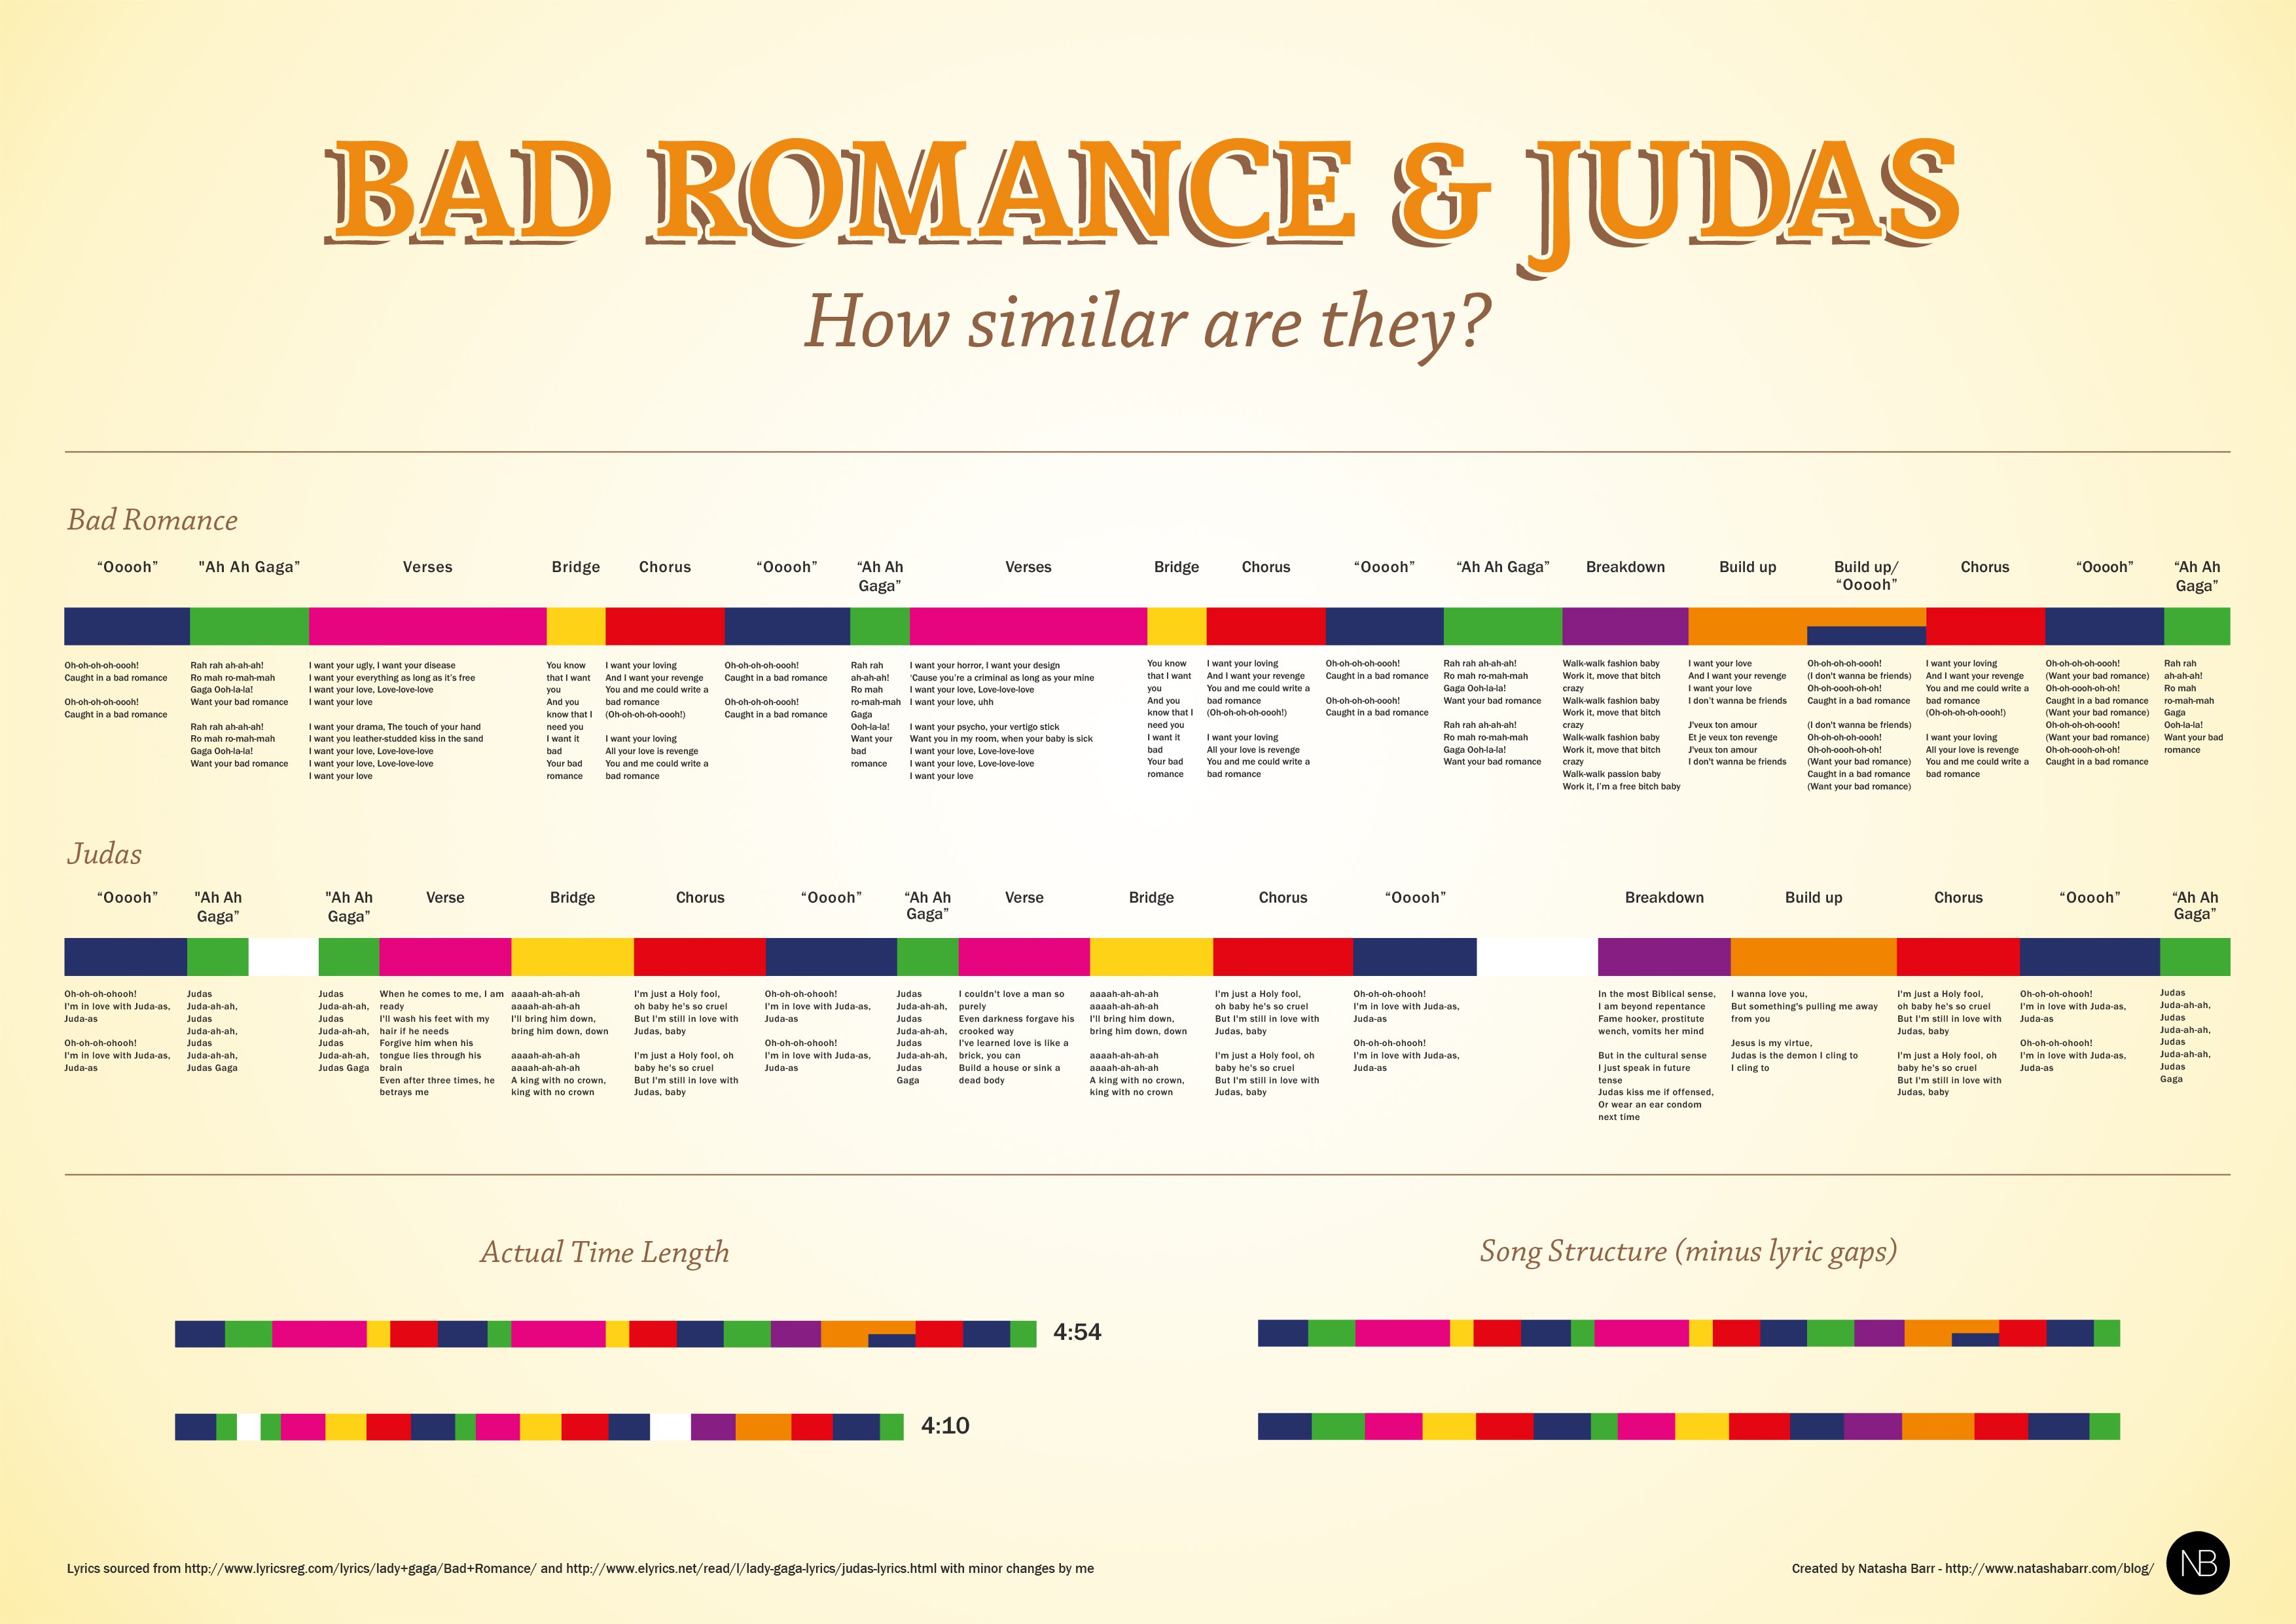 Comparsion of Lady Gaga's songs Bad Romance and Judas